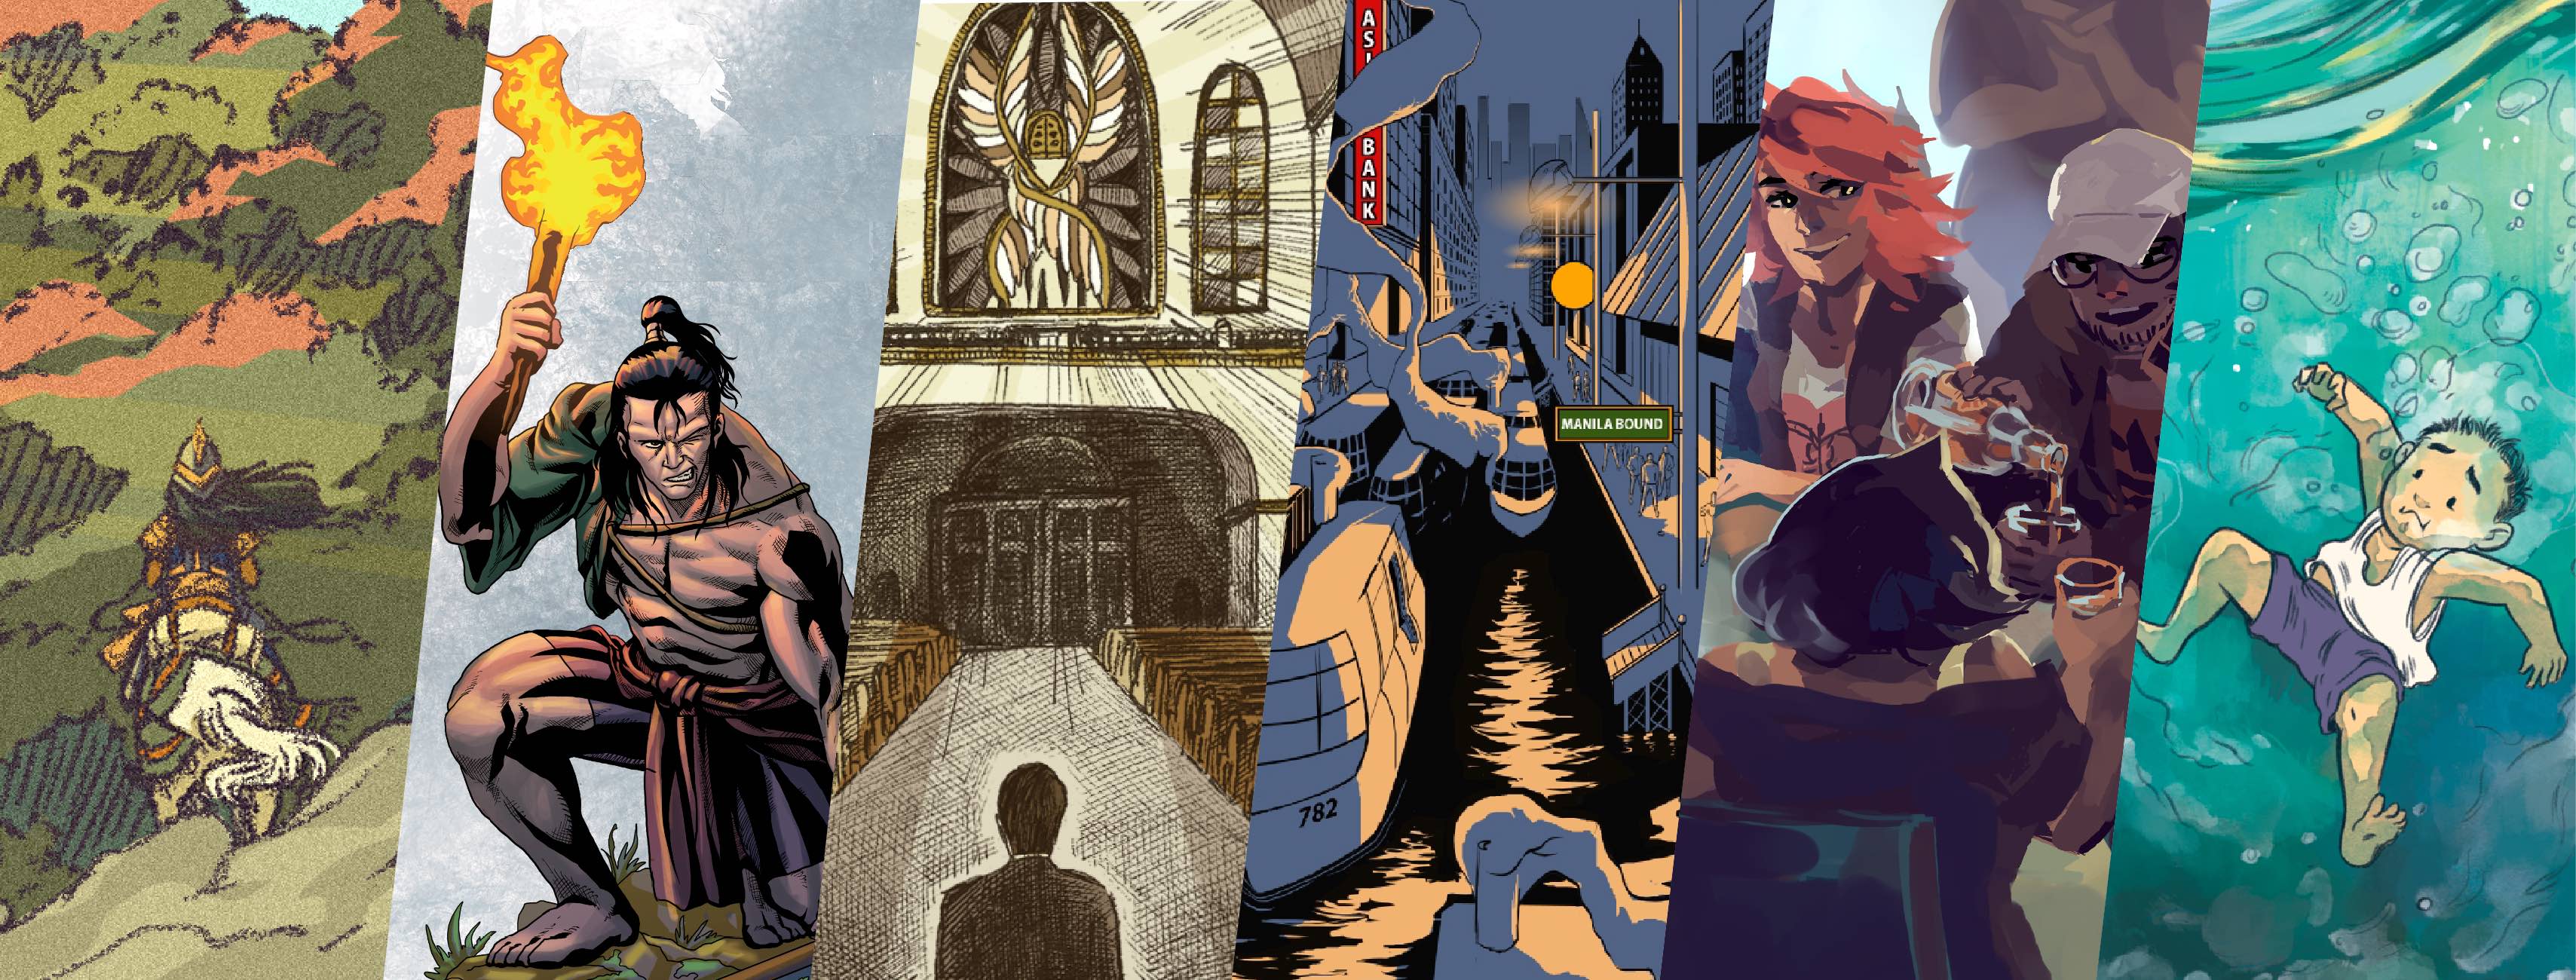 Rectangular montage of six illustrations. Images from left to right are as follows. A woman in armor riding a horse in a forest, seen from the back. A crouched, muscular man holding a lit torch. A priest entering an empty church with a stained glass window. Taxi boats on a river in a flooded city. Three young people chatting over a drink. A boy holding his breath underwater.